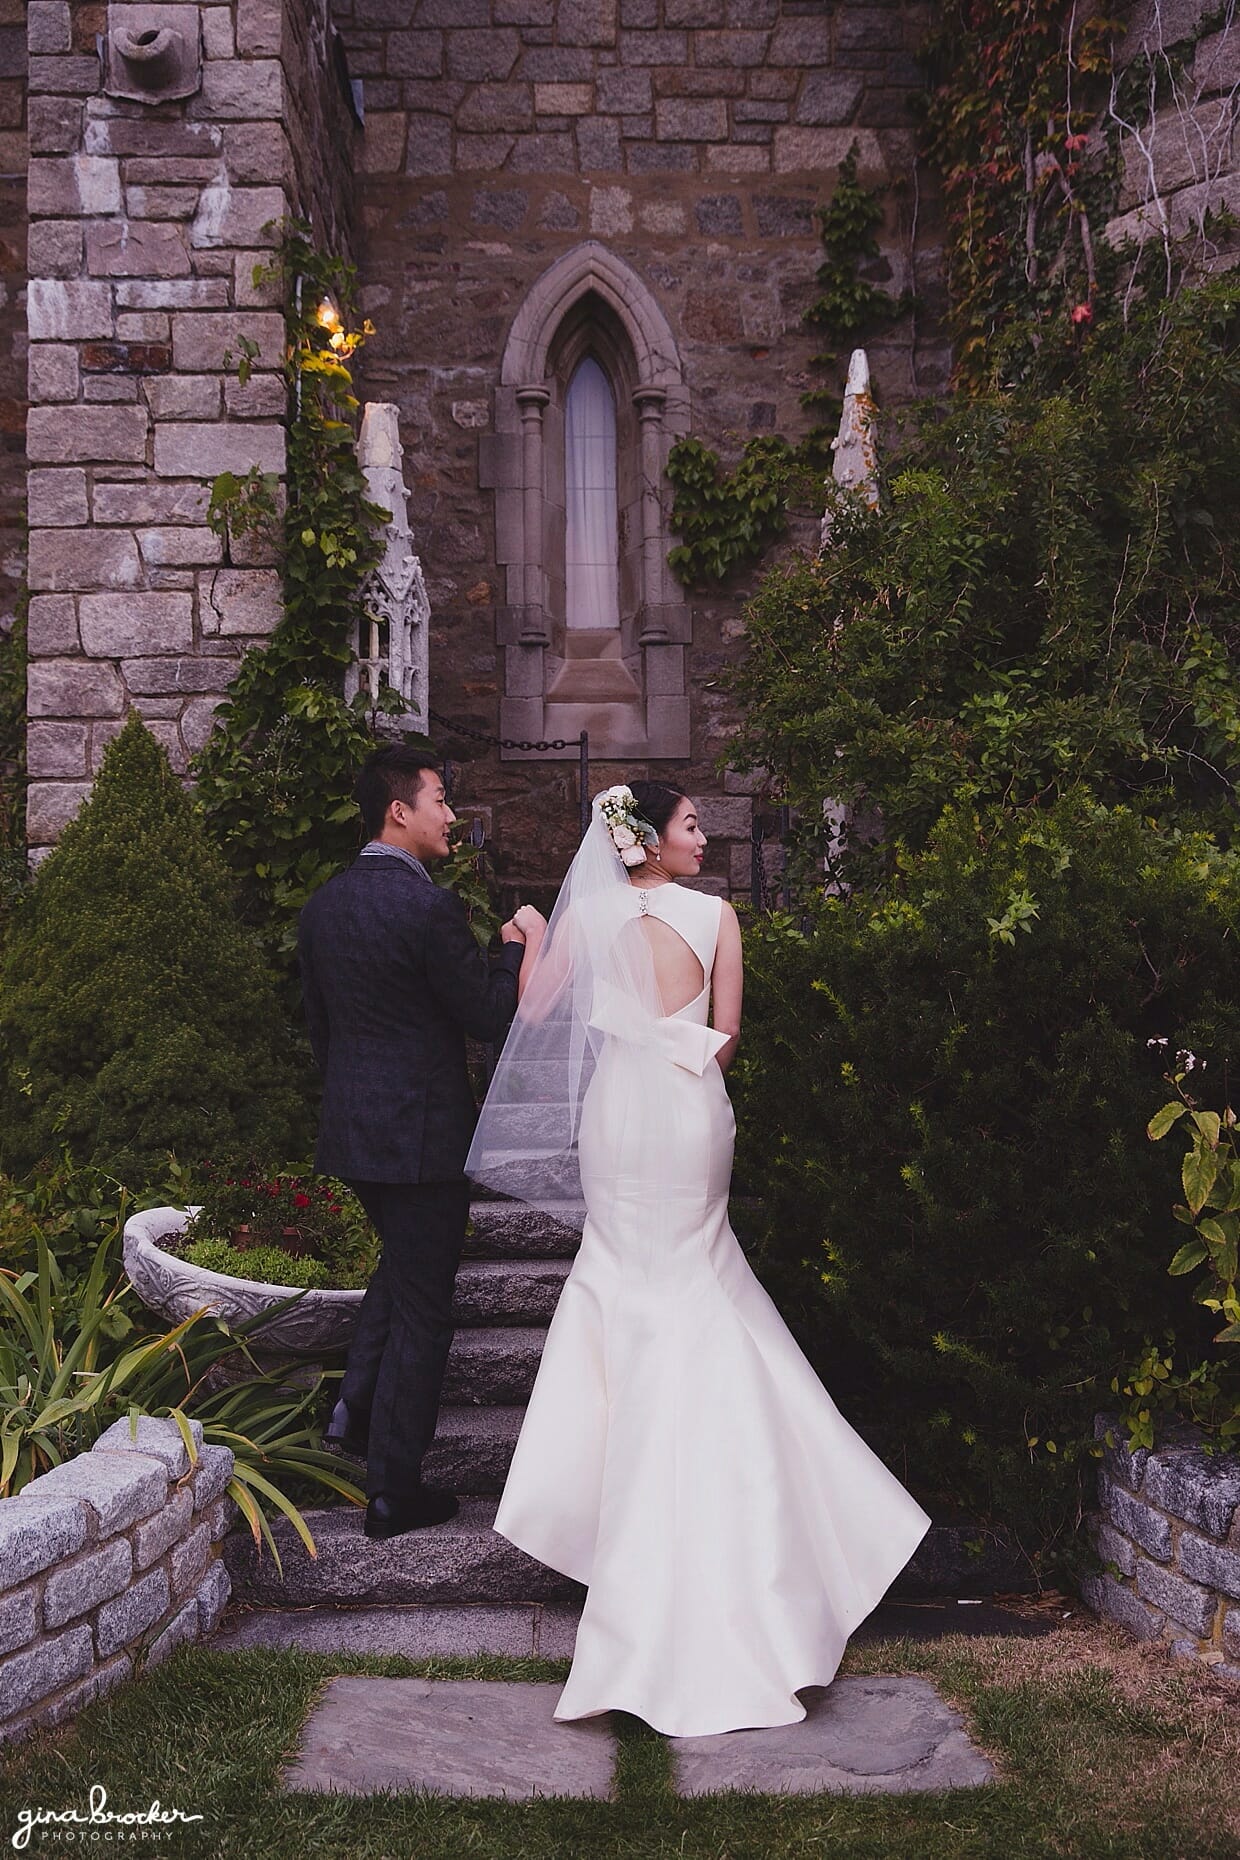 The bride and groom walk into Hammond Castle after their beautiful outdoor wedding ceremony